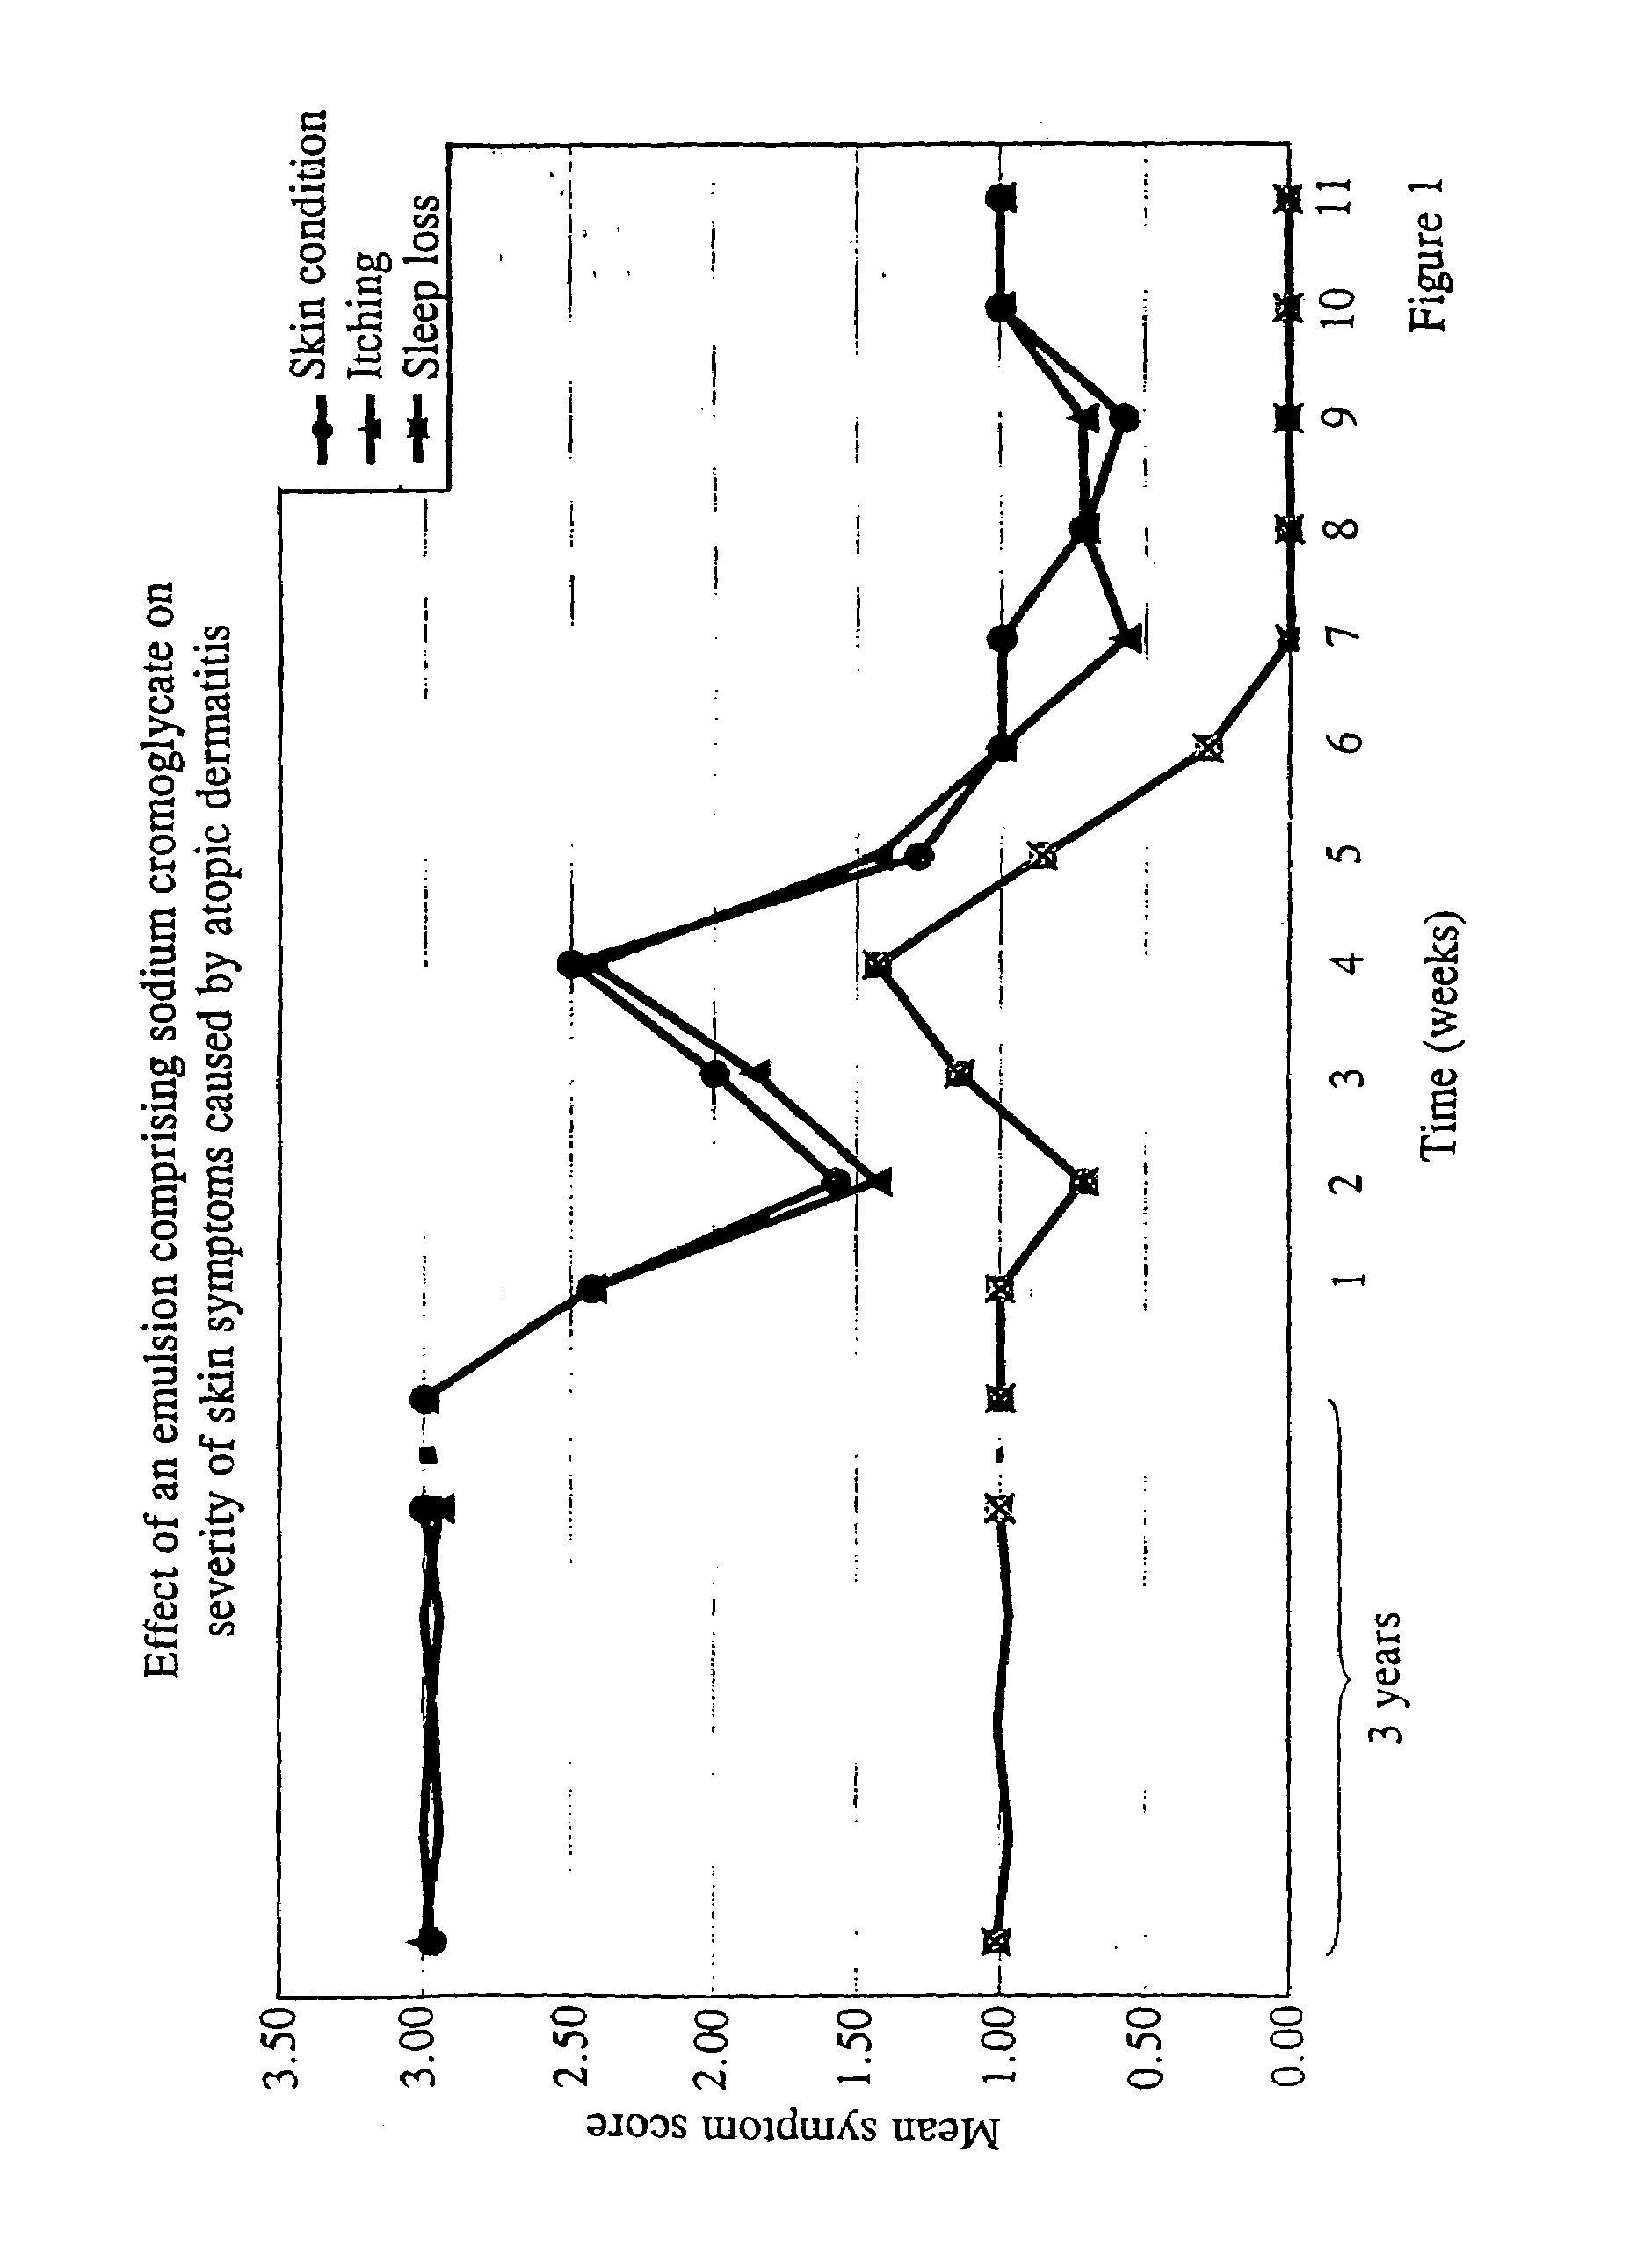 Pharmaceutical compositions comprising an amphoteric surfactant an alkoxylated cetyl alcohol and a polar drug